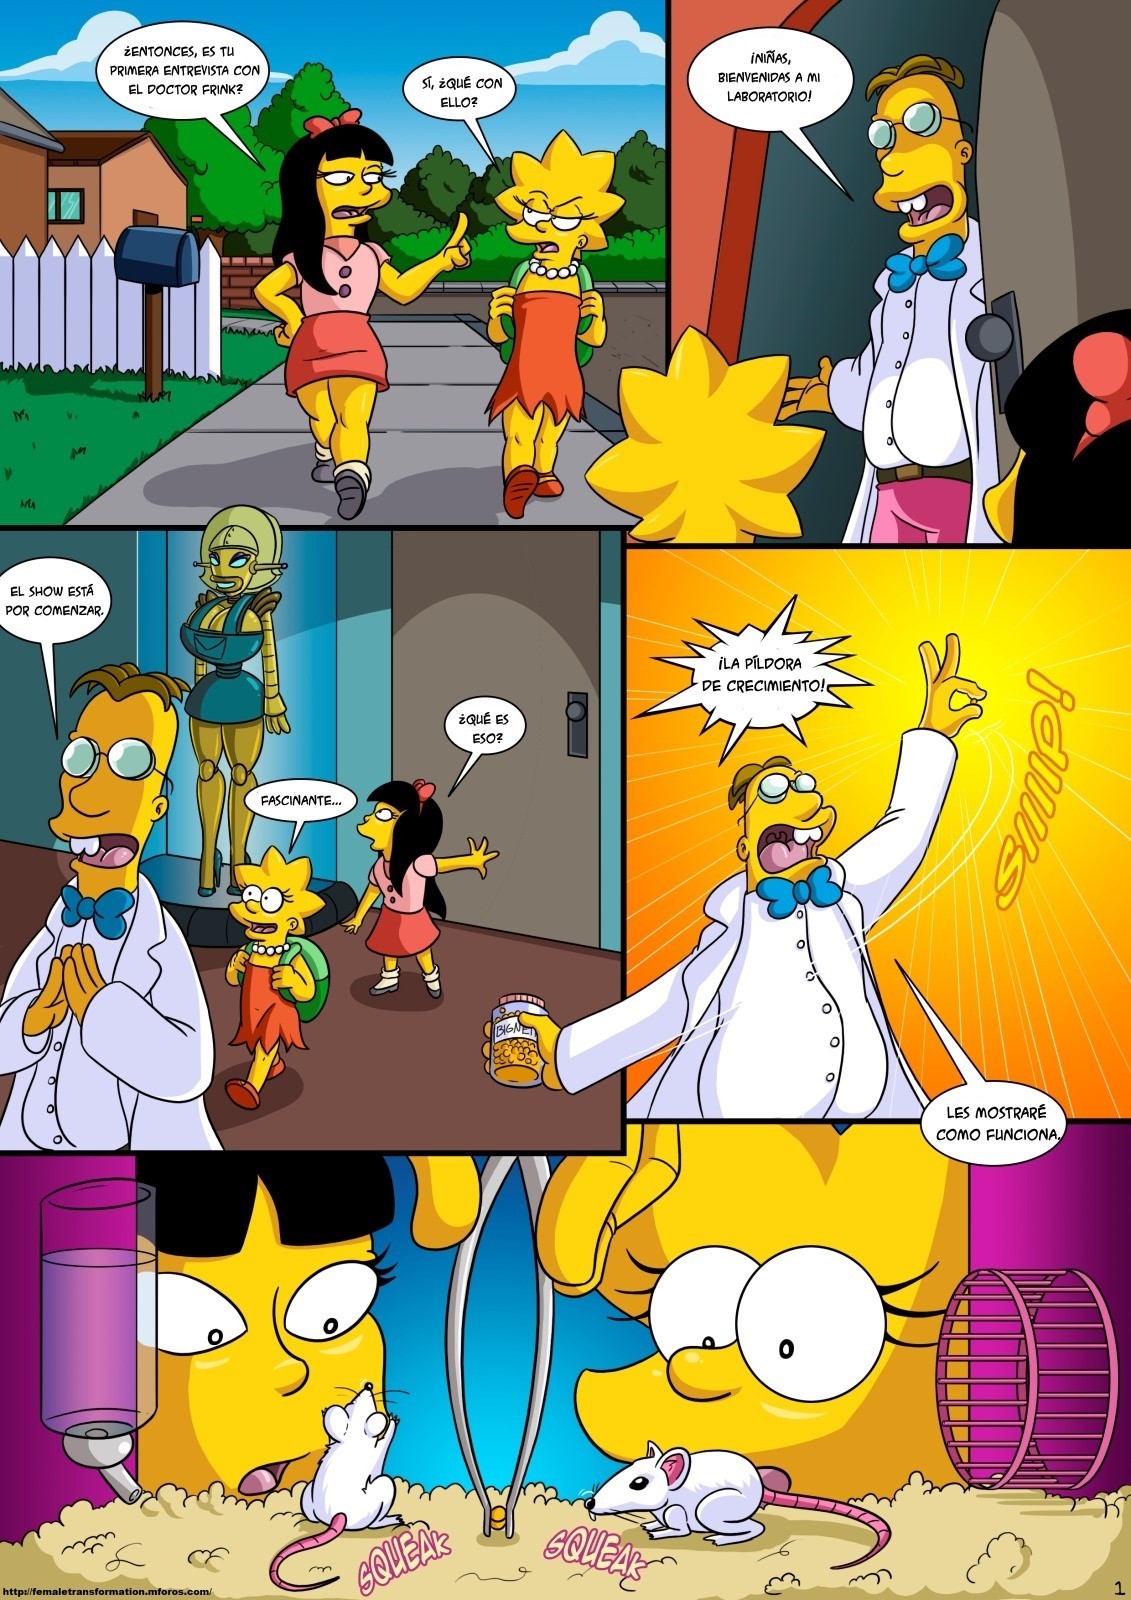 TREEHOUSE of HORROR parte 3